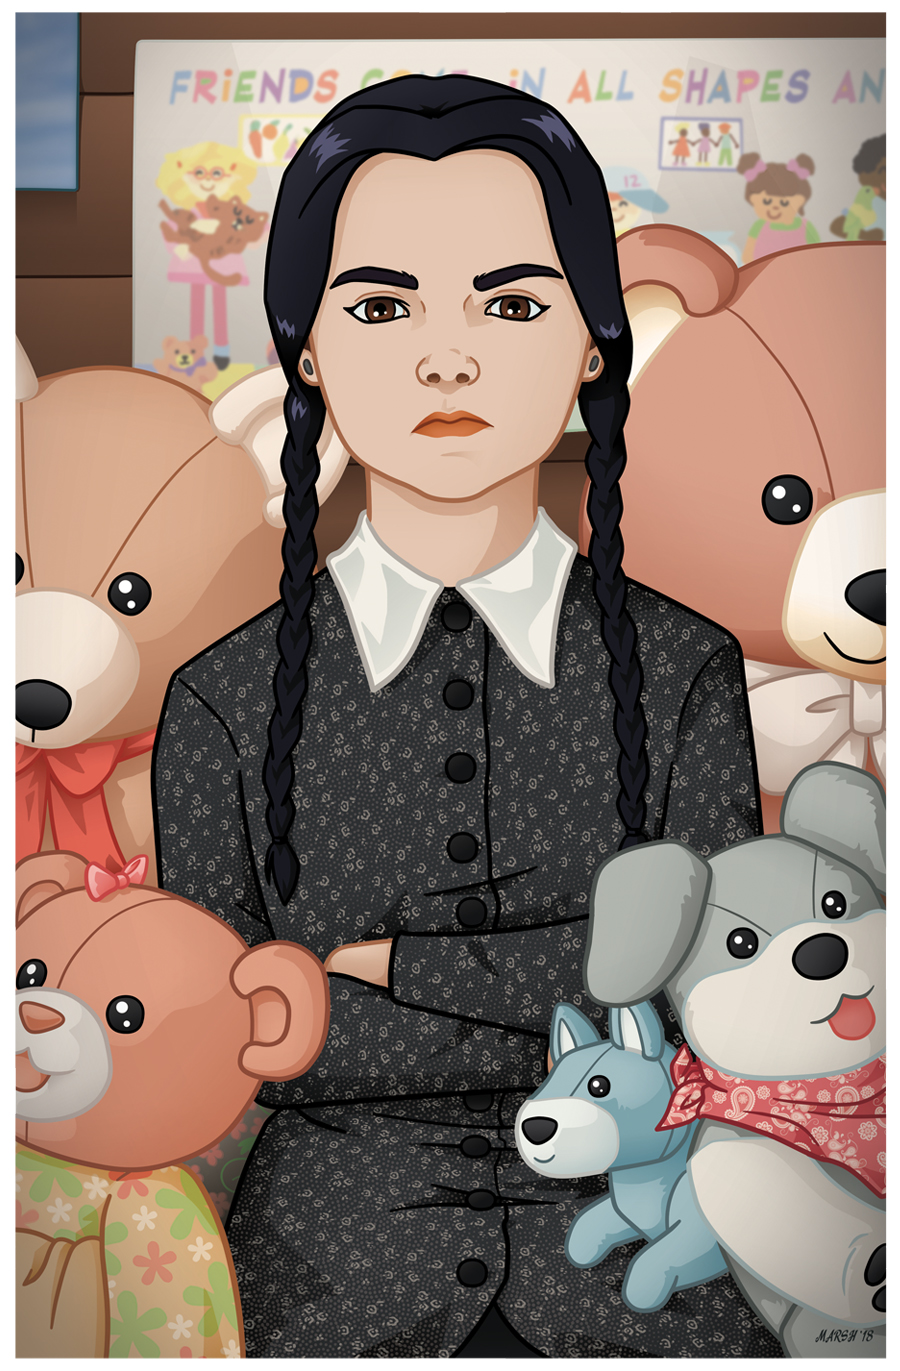  Wednesday from The Addams Family. Inspired by the Harmony Hut scenes in the 1991 The Addams Family movie. 